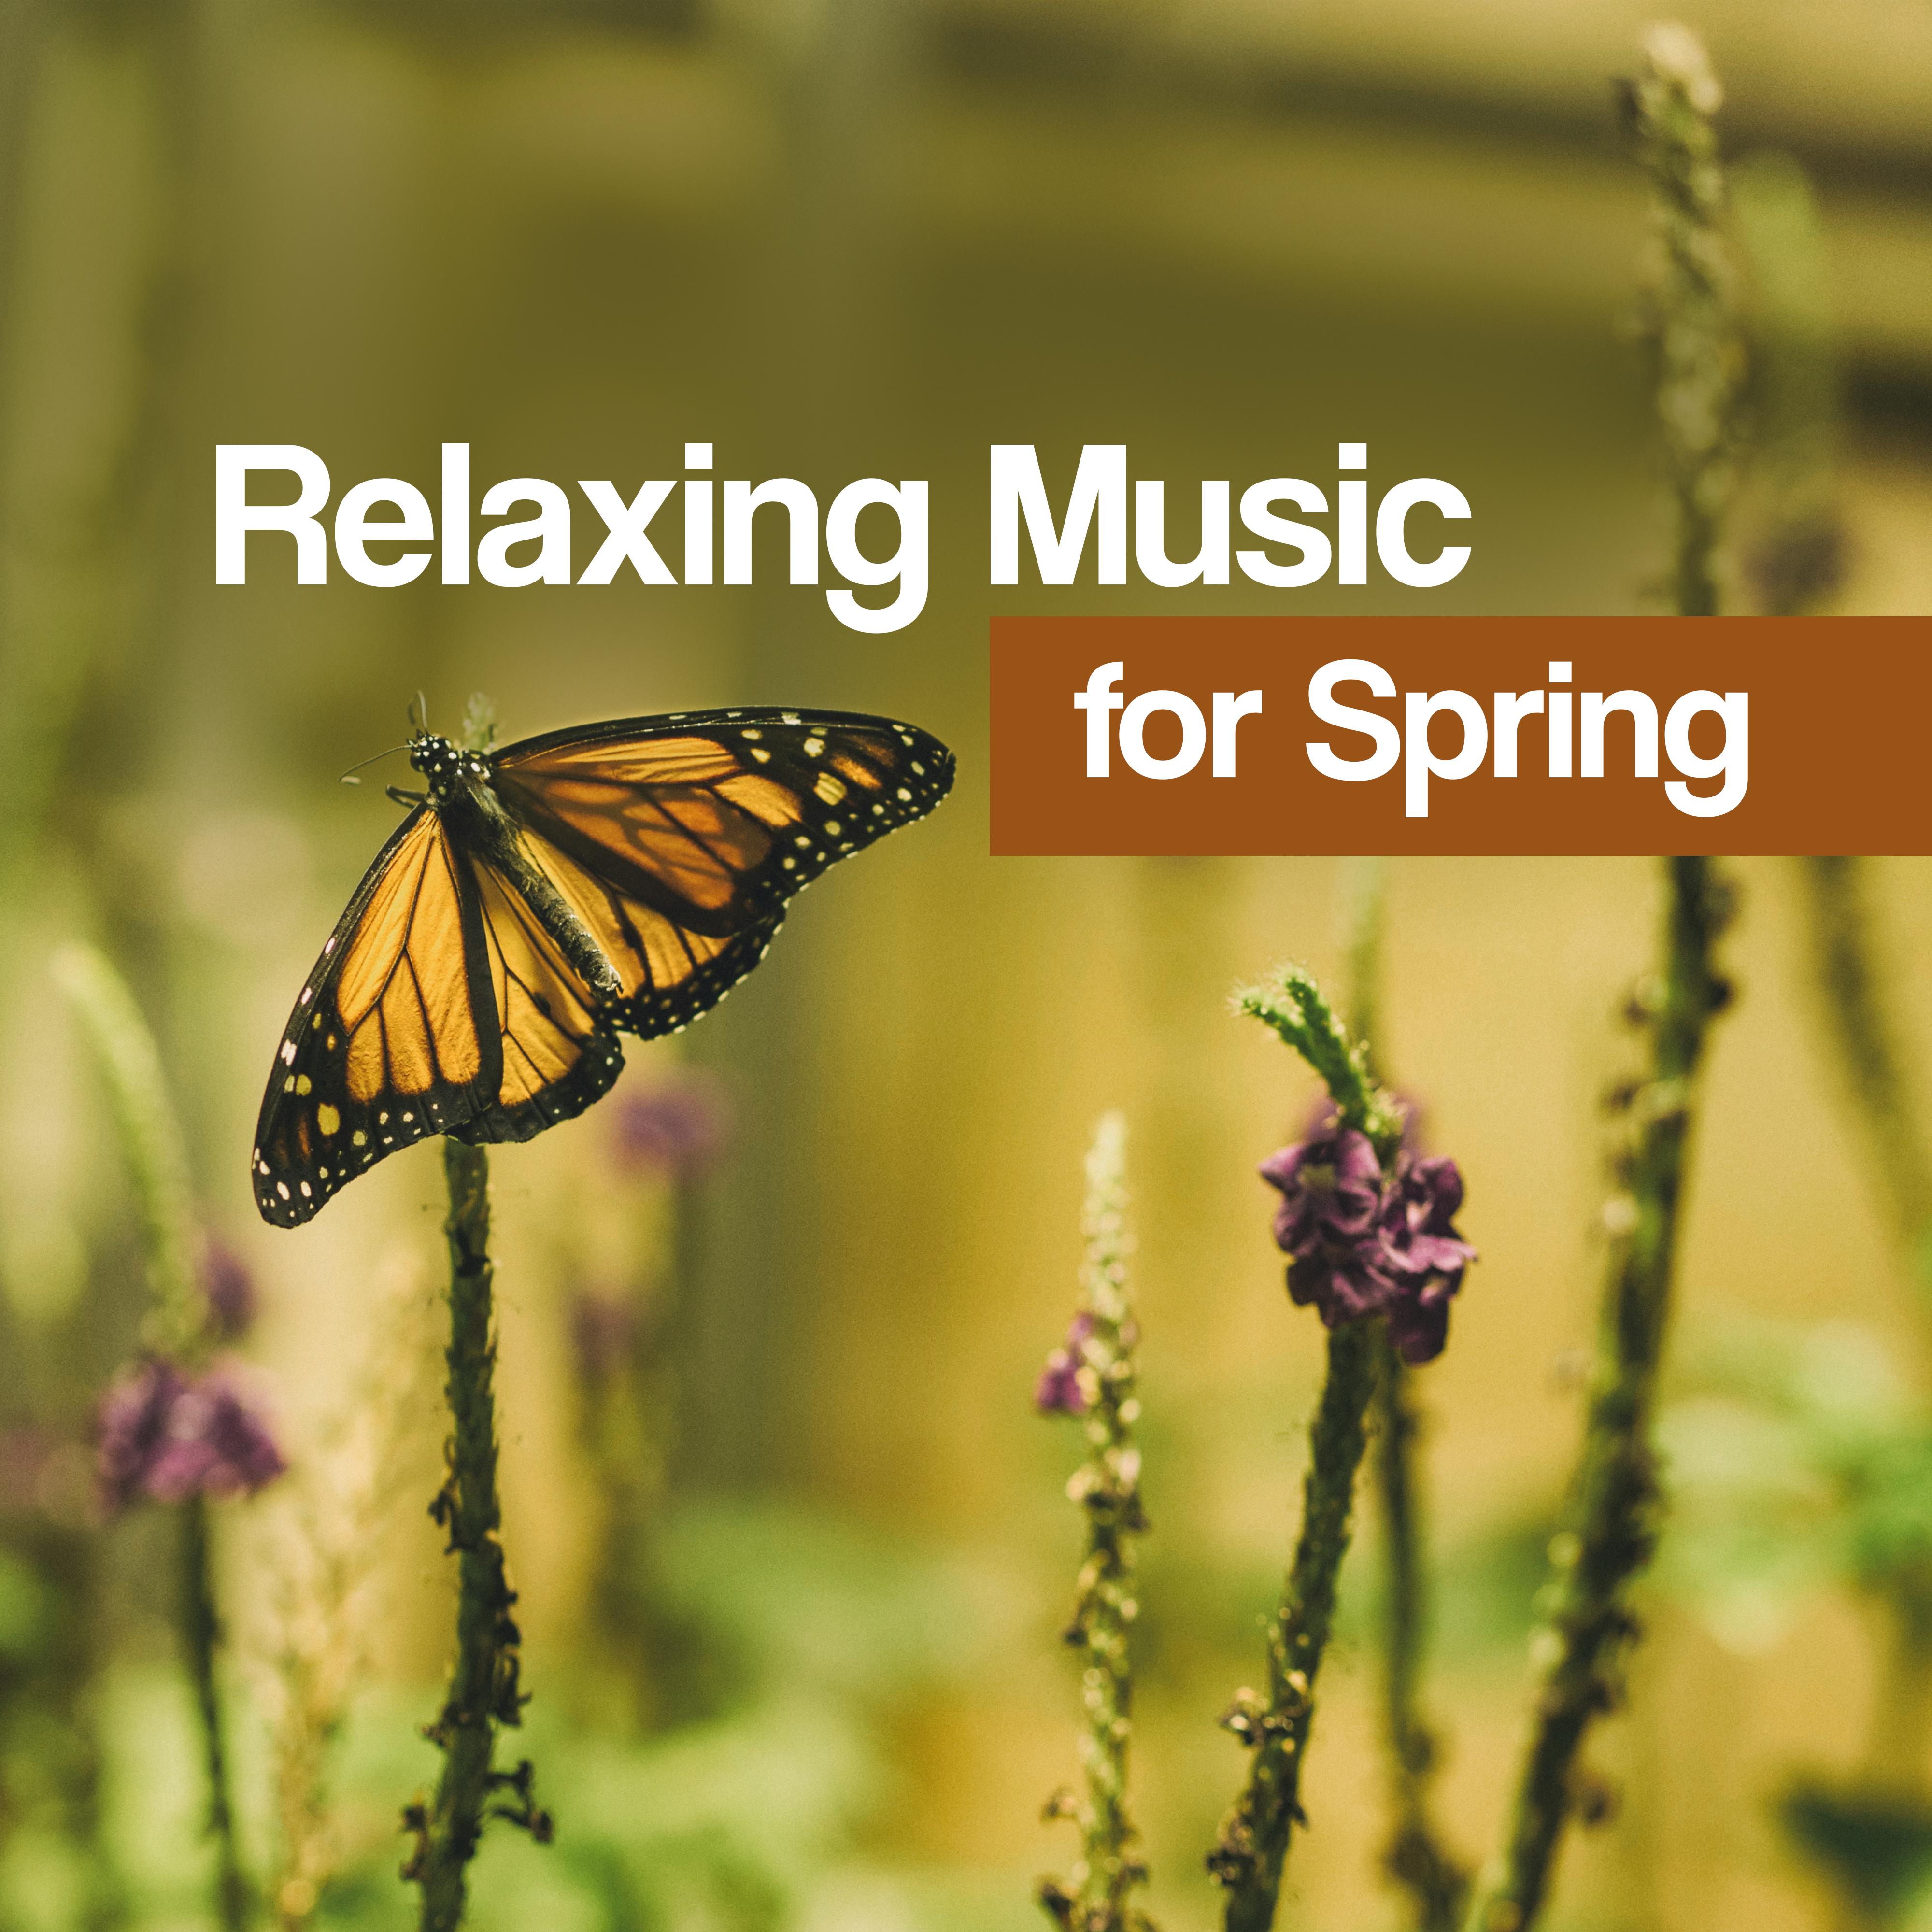 Relaxing Music for Spring  New Age Music, Nature Sounds, Just Relax, Rest, Stress Relief